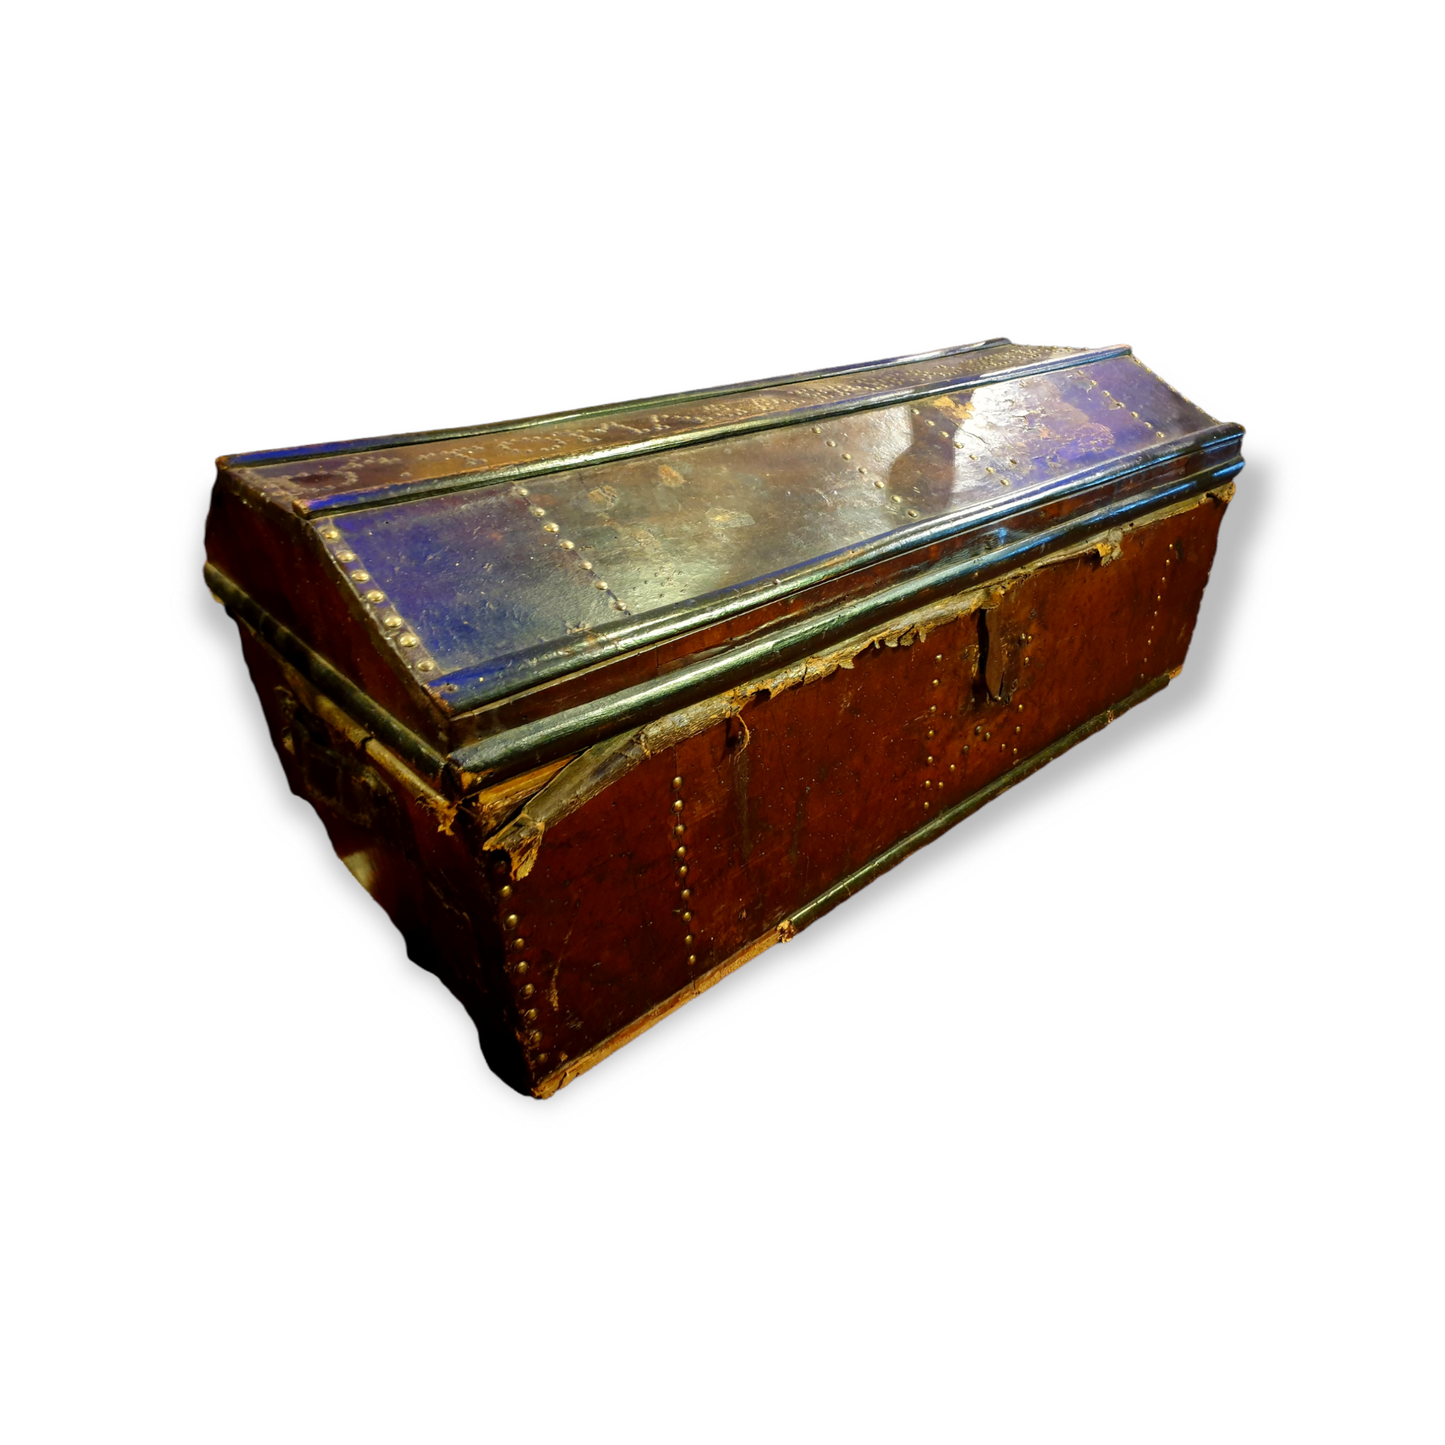 17th Century Spanish Antique Leather-Bound Travelling Trunk or Chest